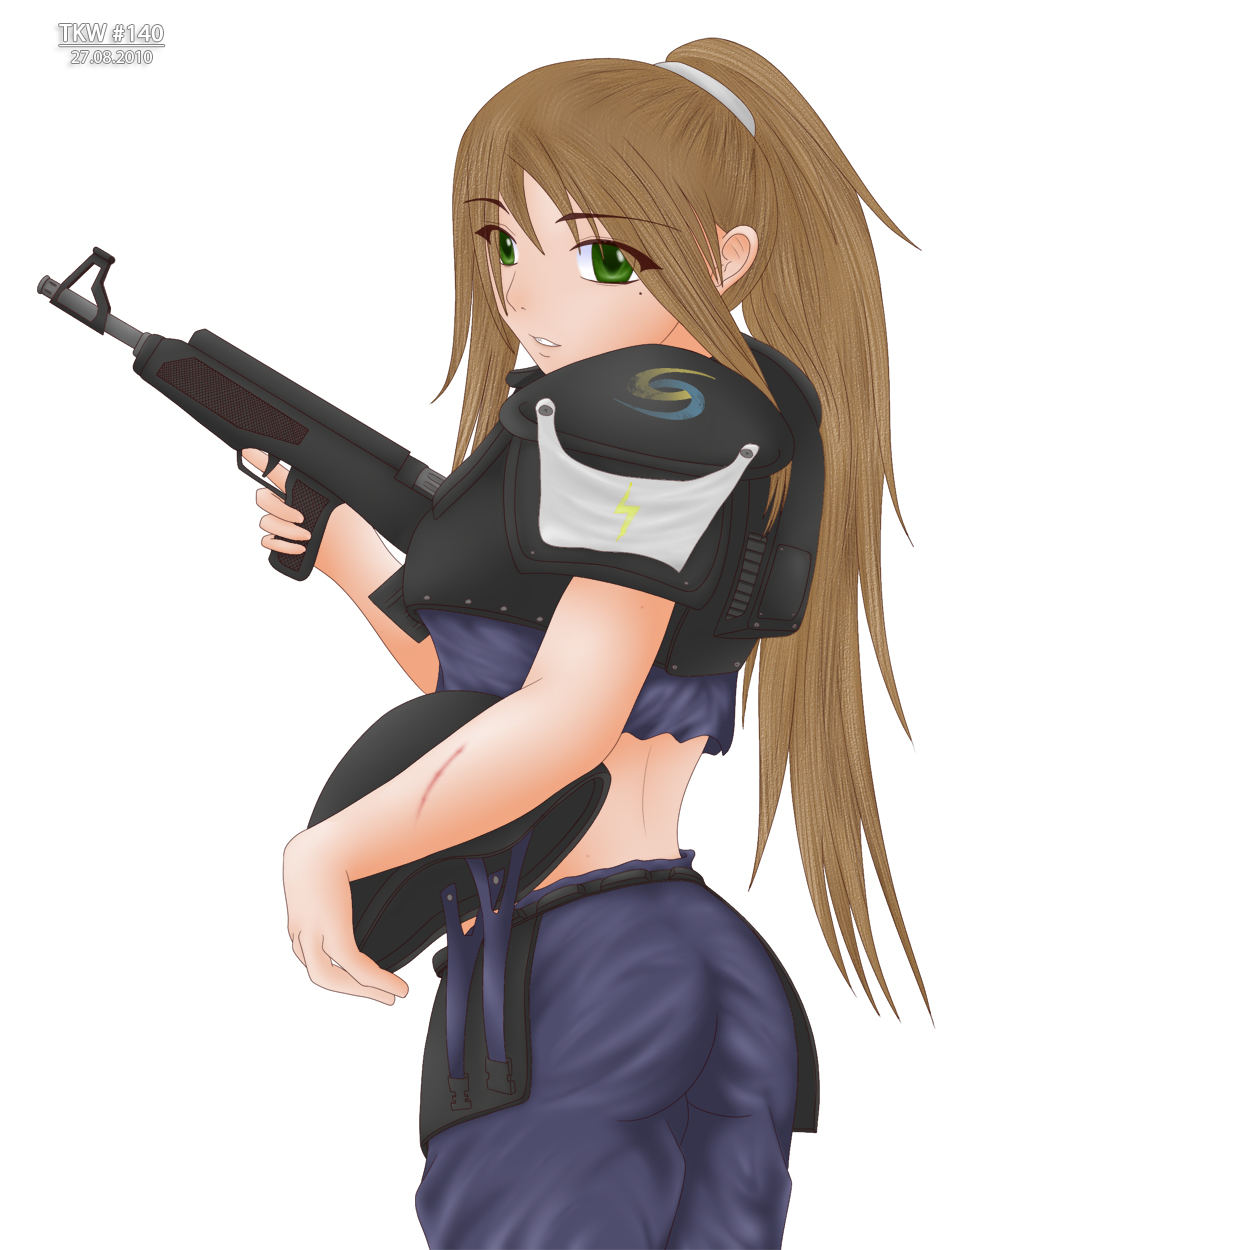 Female Security Guard By Tkwx On Deviantart